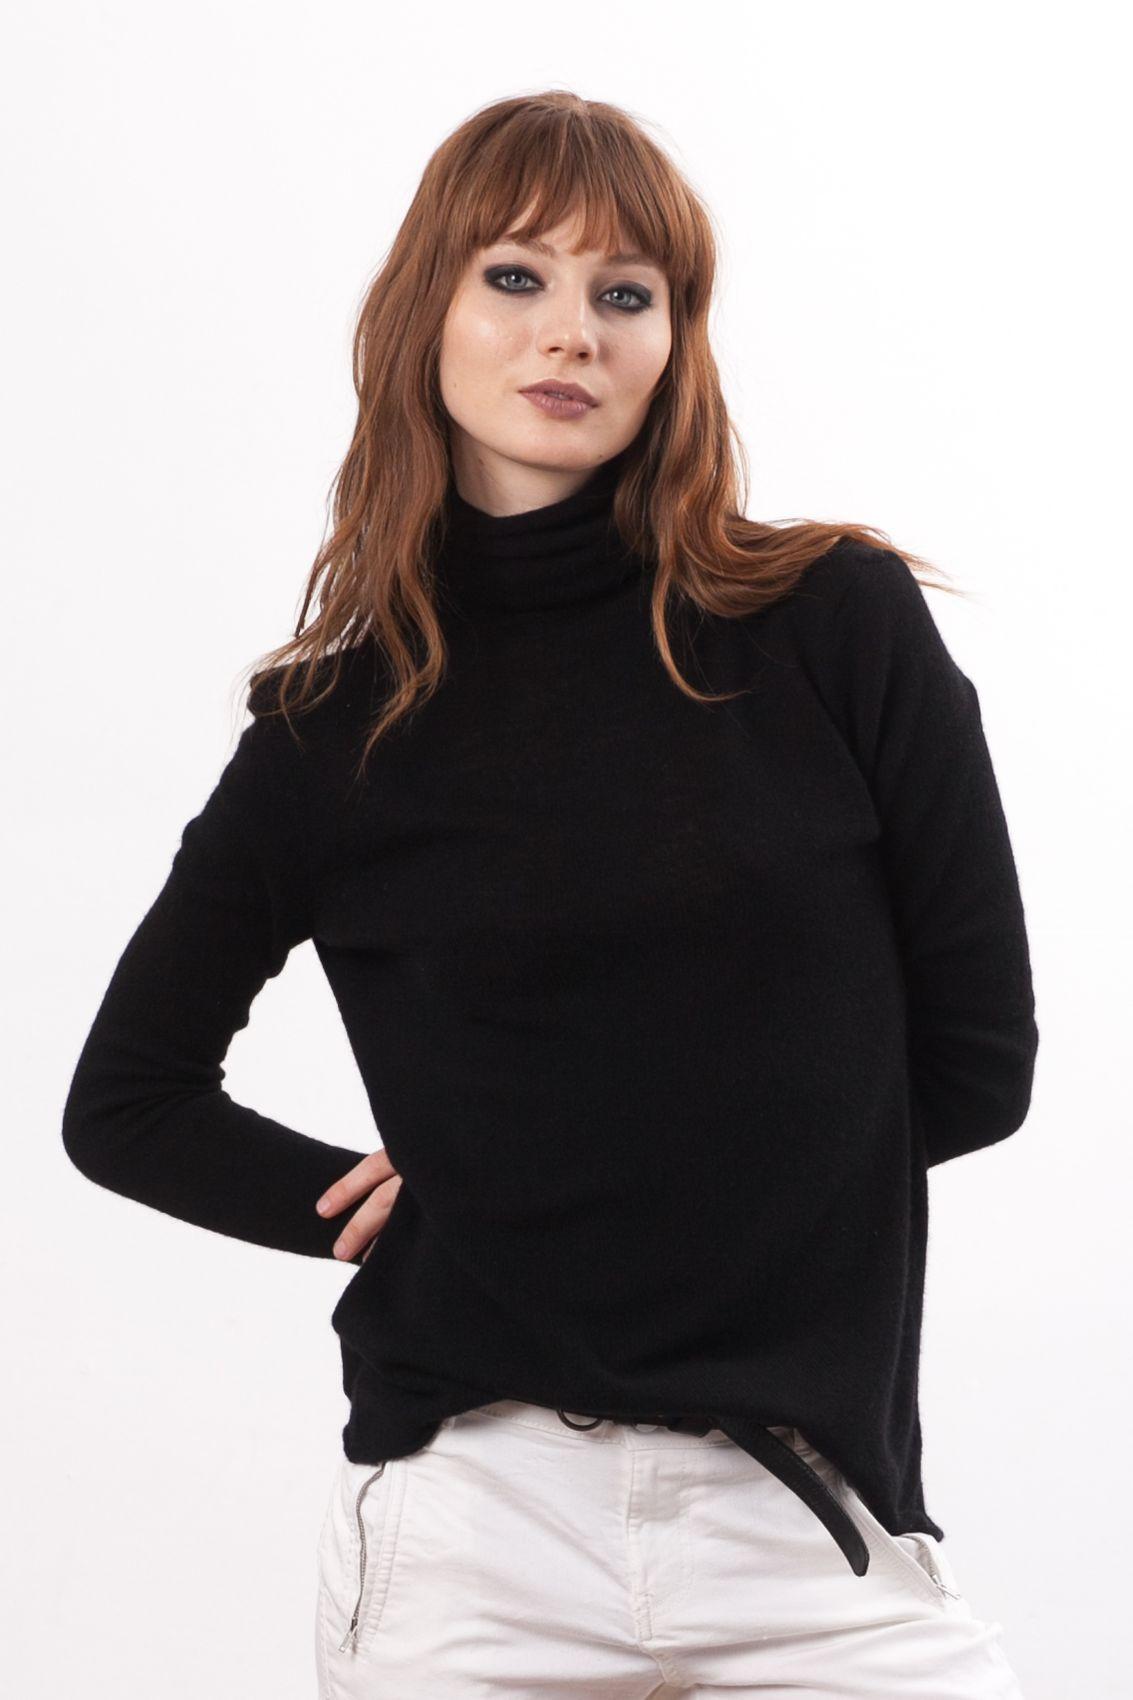 In this elegant image, the KATE by Krista Elsta black cashmere turtleneck takes center stage, showcasing a perfect blend of luxury and style. The rich black hue of the cashmere fabric accentuates the timeless design, offering a cozy and sophisticated look. The turtleneck's snug fit gracefully enhances the silhouette, making it a versatile wardrobe essential for any fashion-forward individual